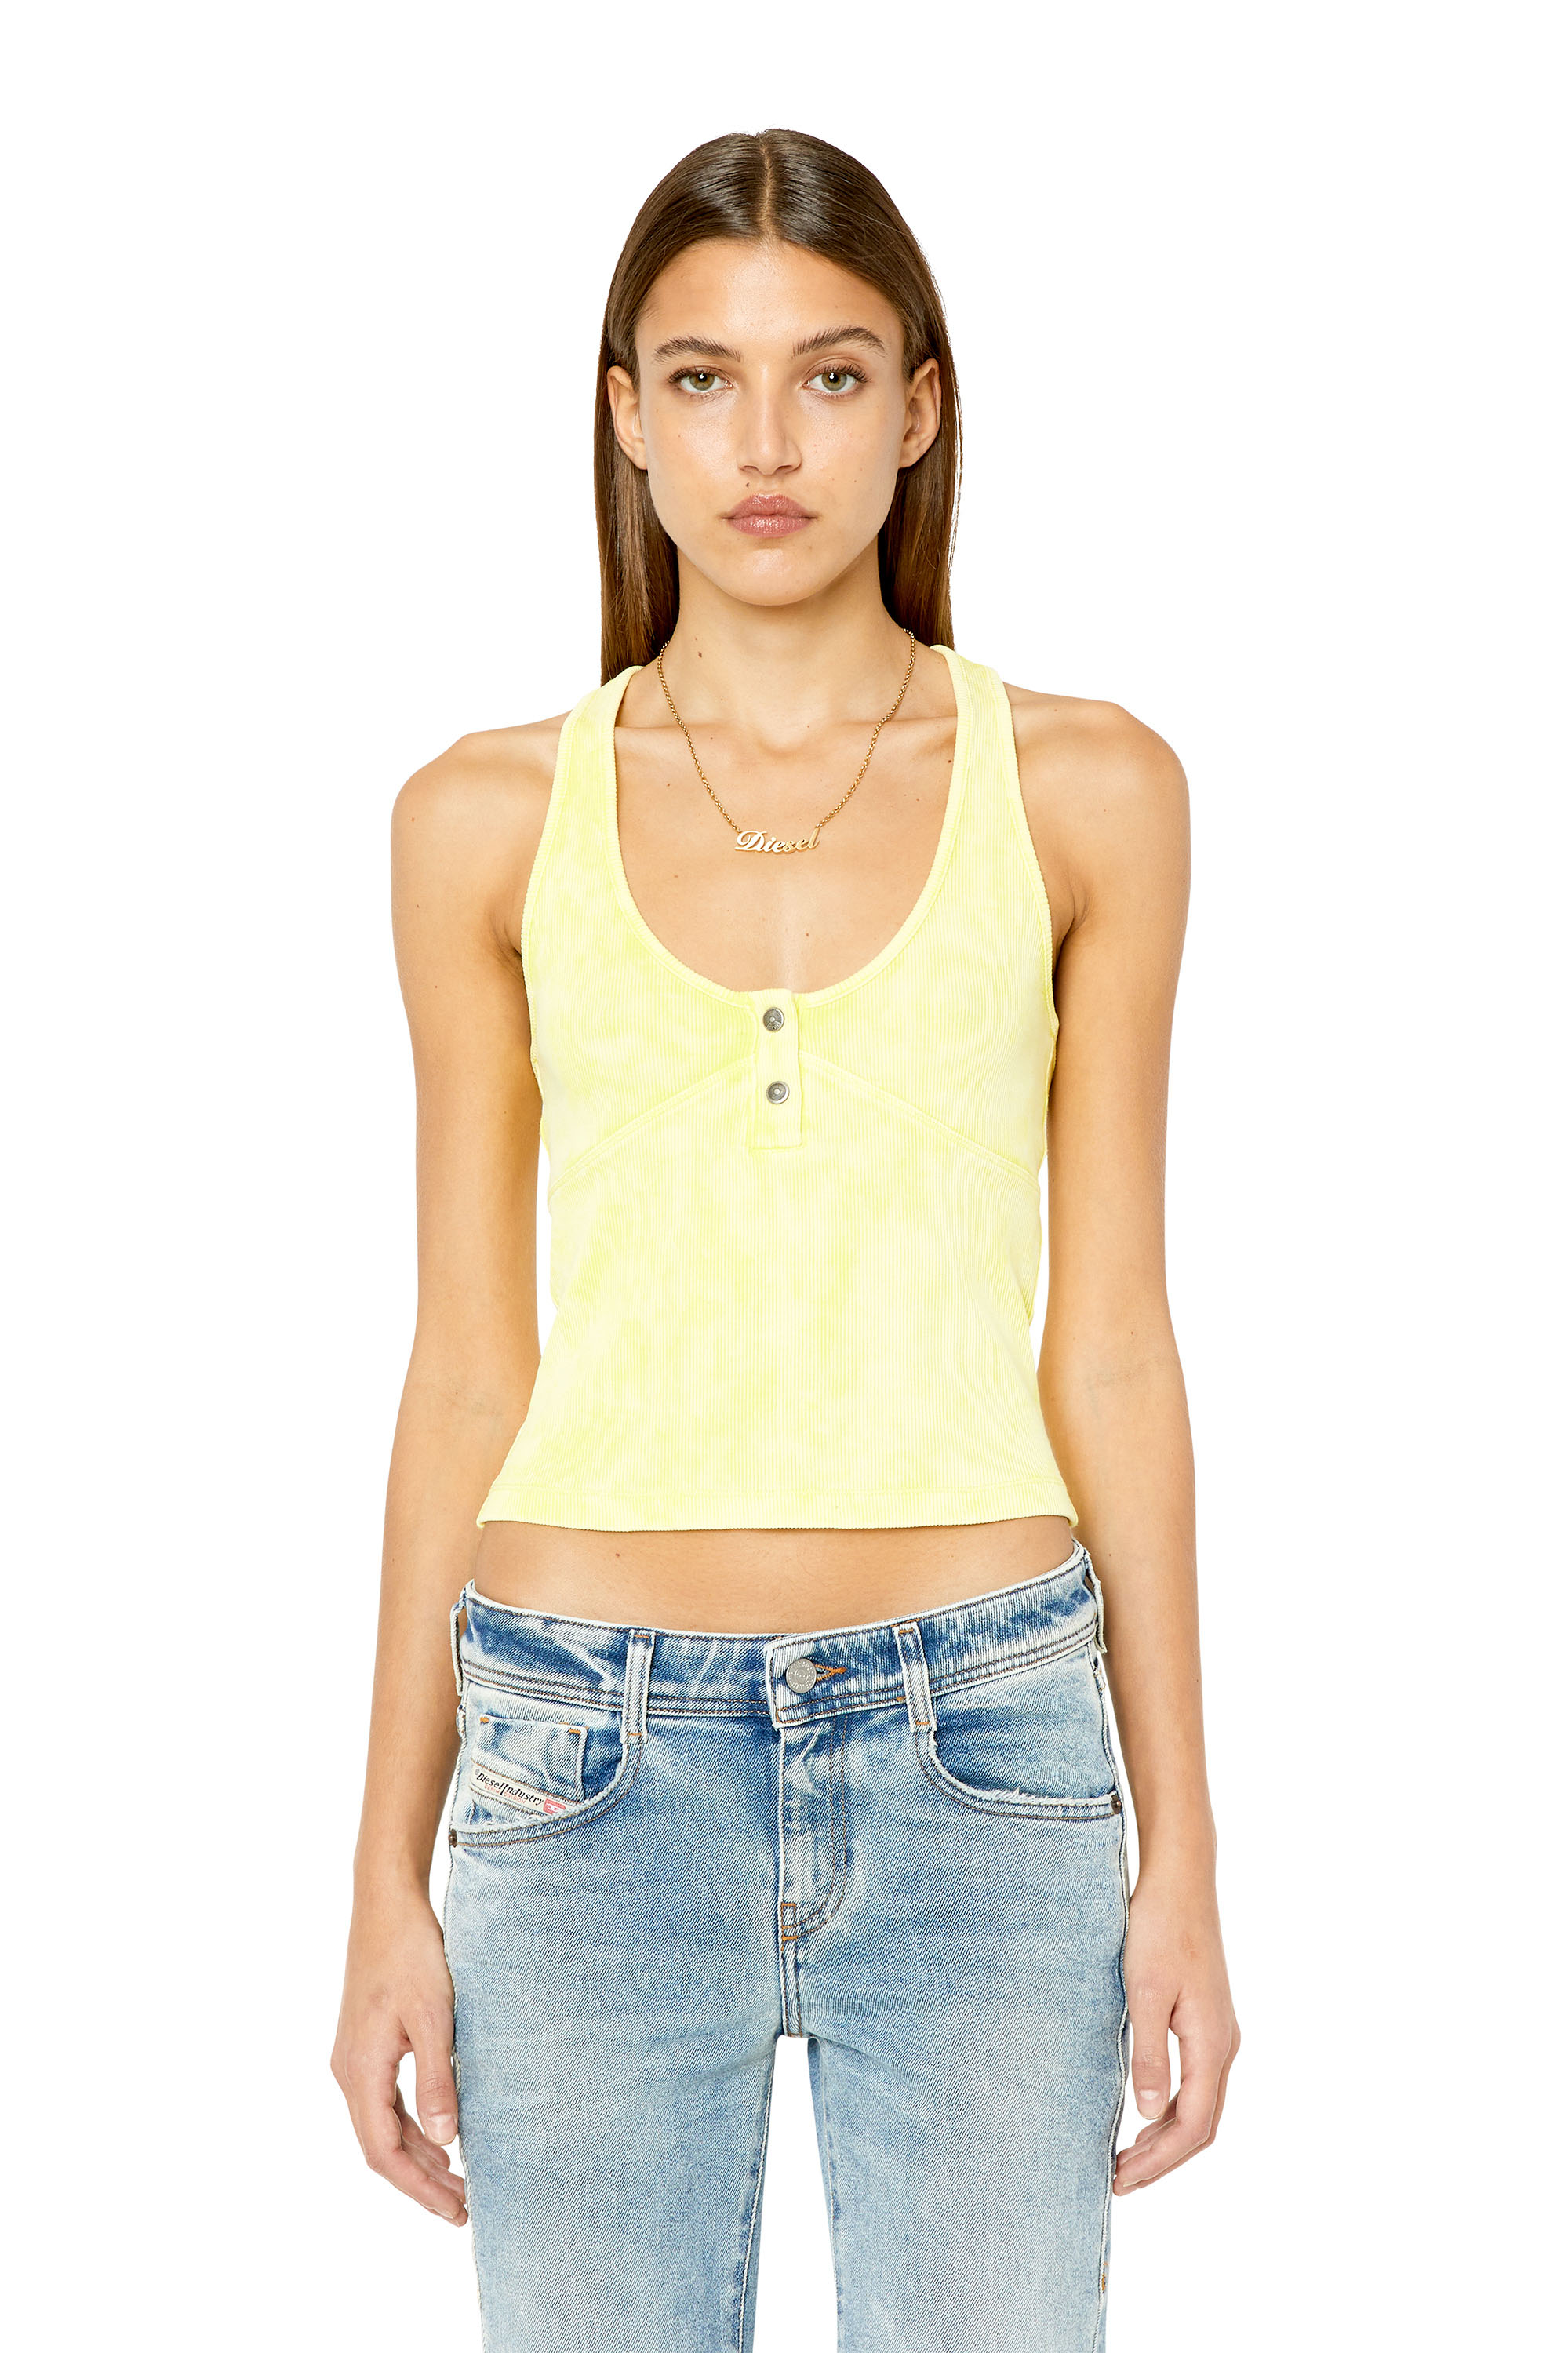 Diesel - T-ANIESSE, Giallo Fluo - Image 2